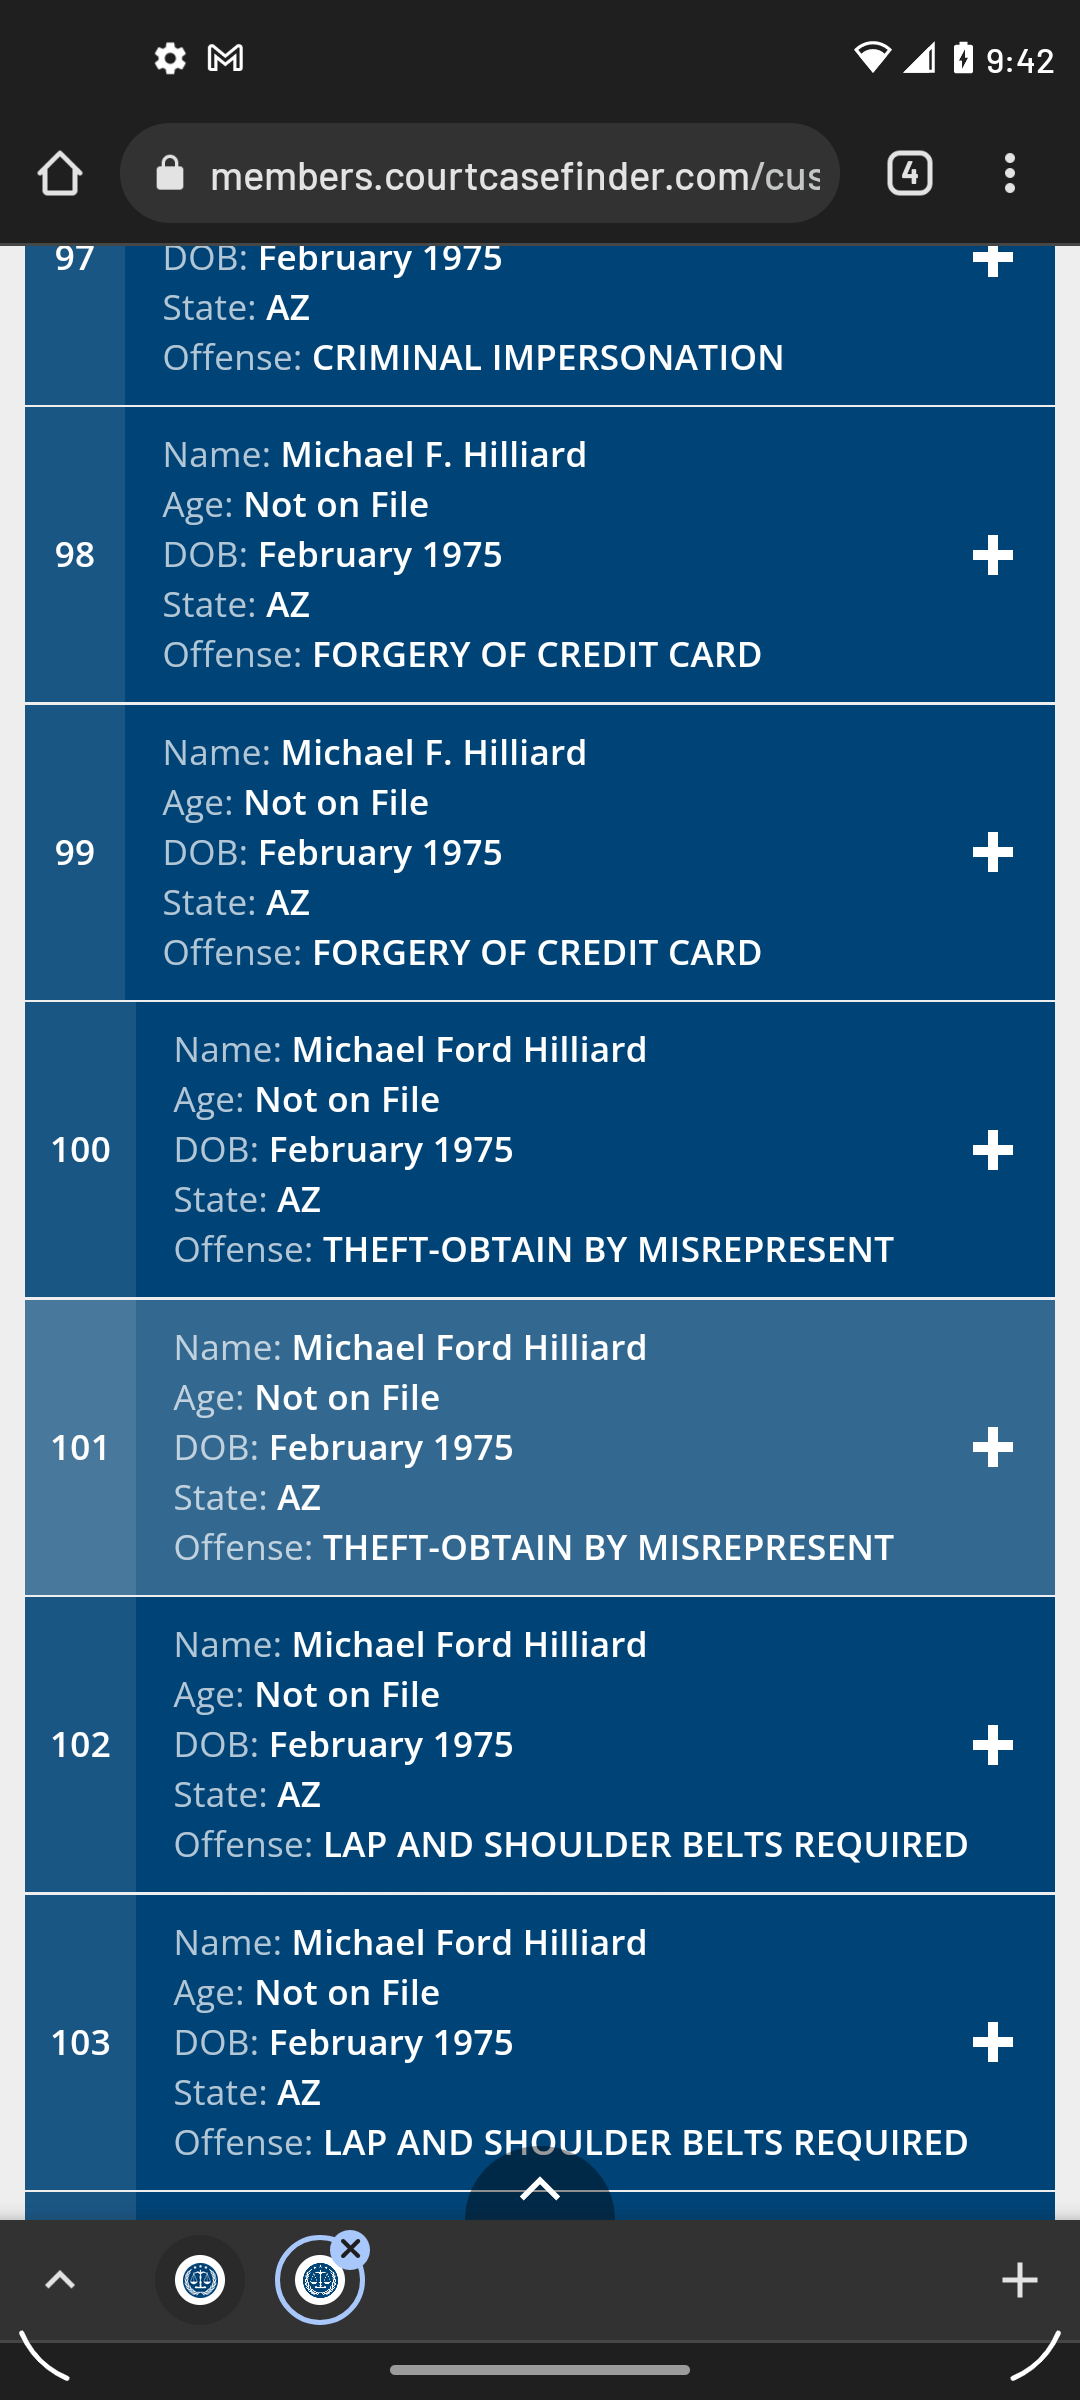 Michael Hilliard is a known scam artist